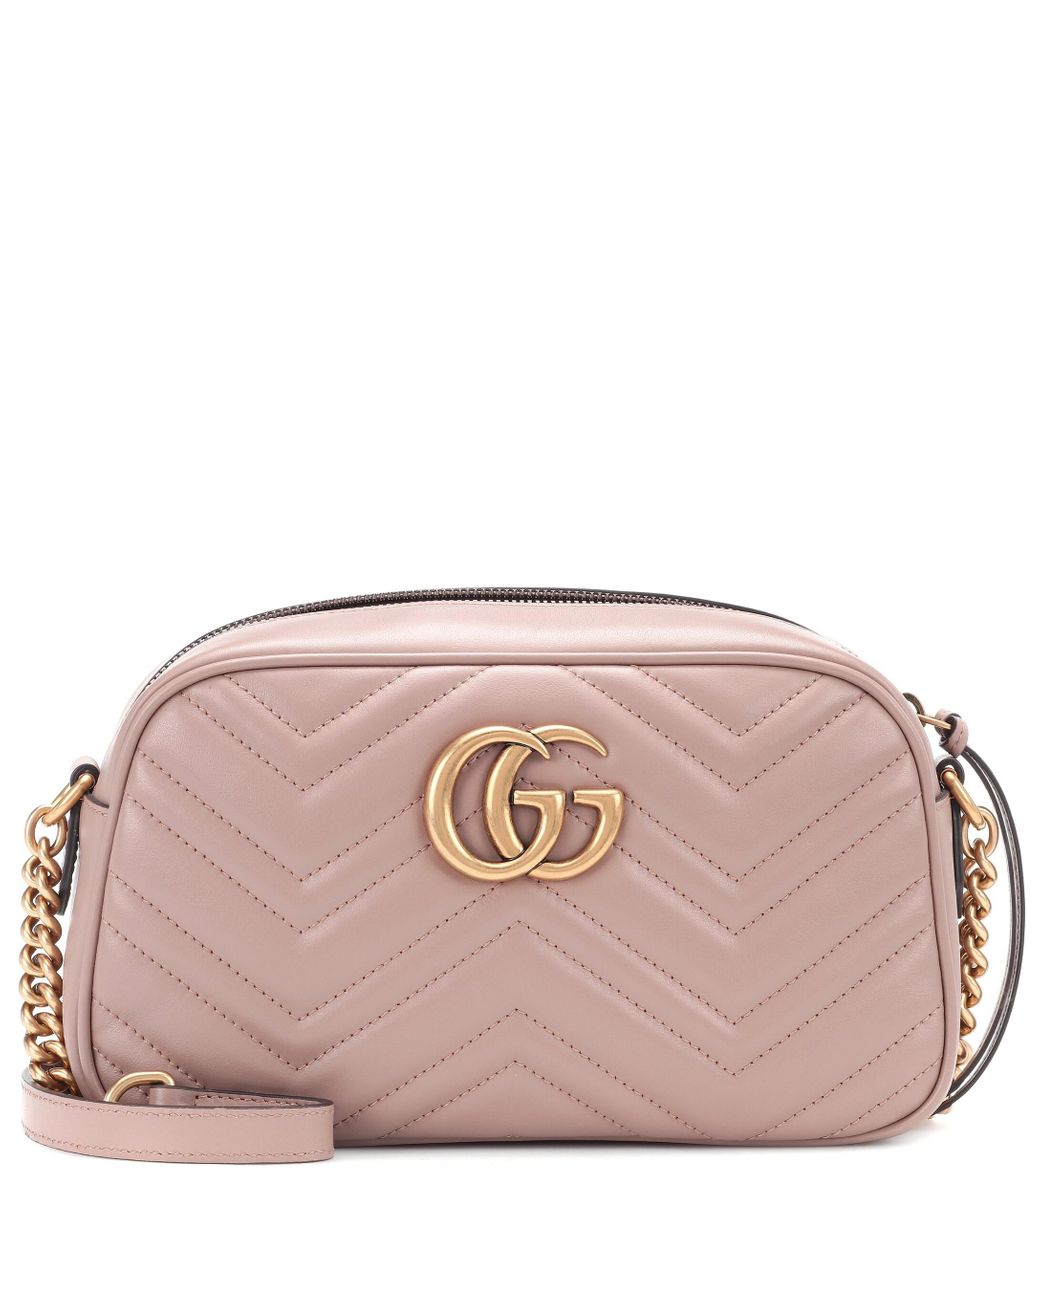 Gucci GG Marmont Small Leather Shoulder Bag in Pink - Lyst